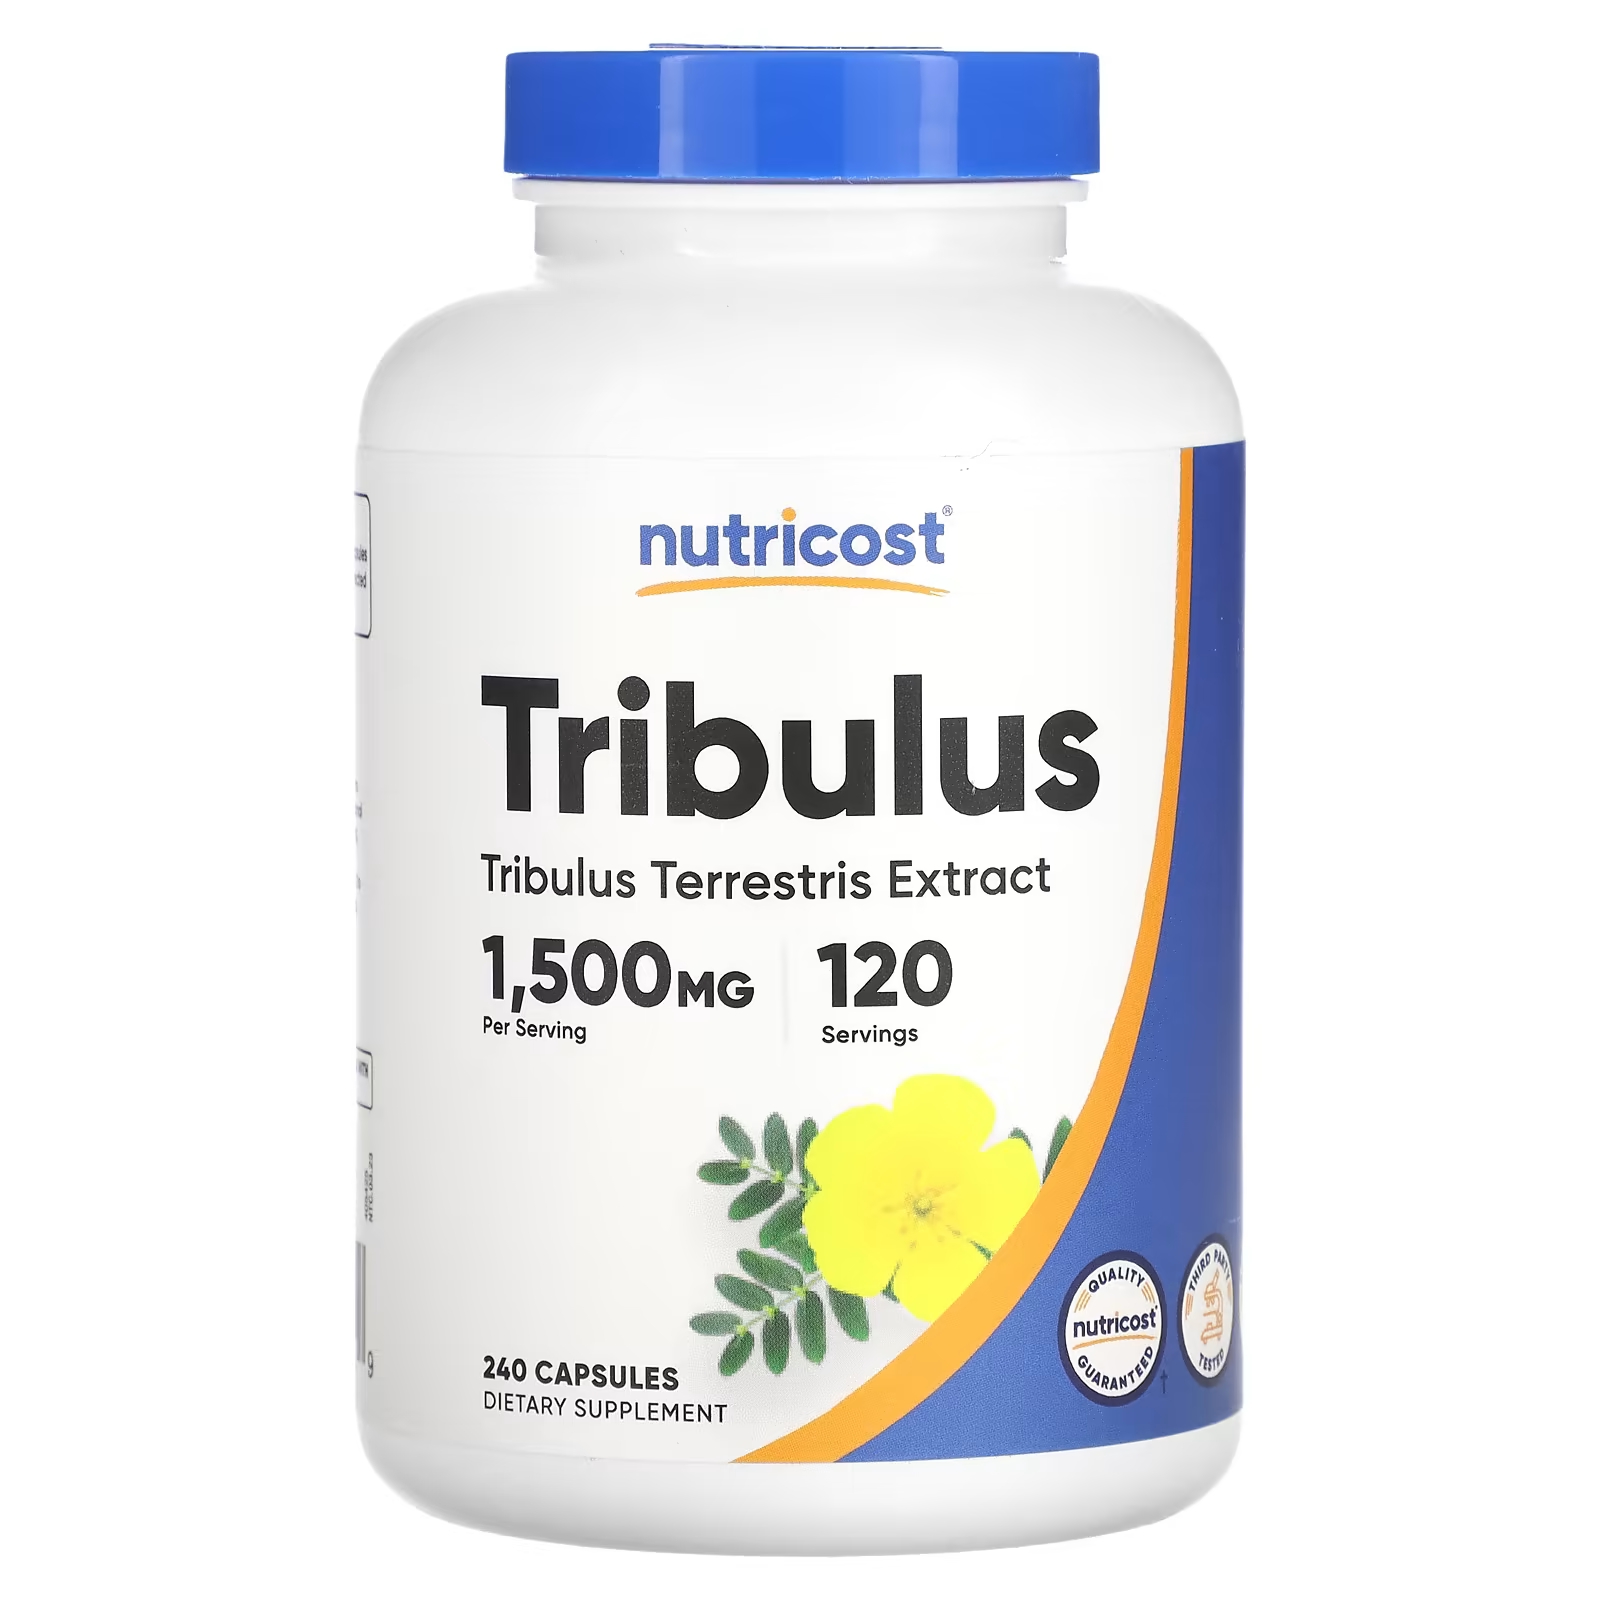 Nutricost Tribulus 1500 мг 240 капсул (750 мг на капсулу) nutricost кордицепс гриб 1100 мг 90 капсул 550 мг на капсулу